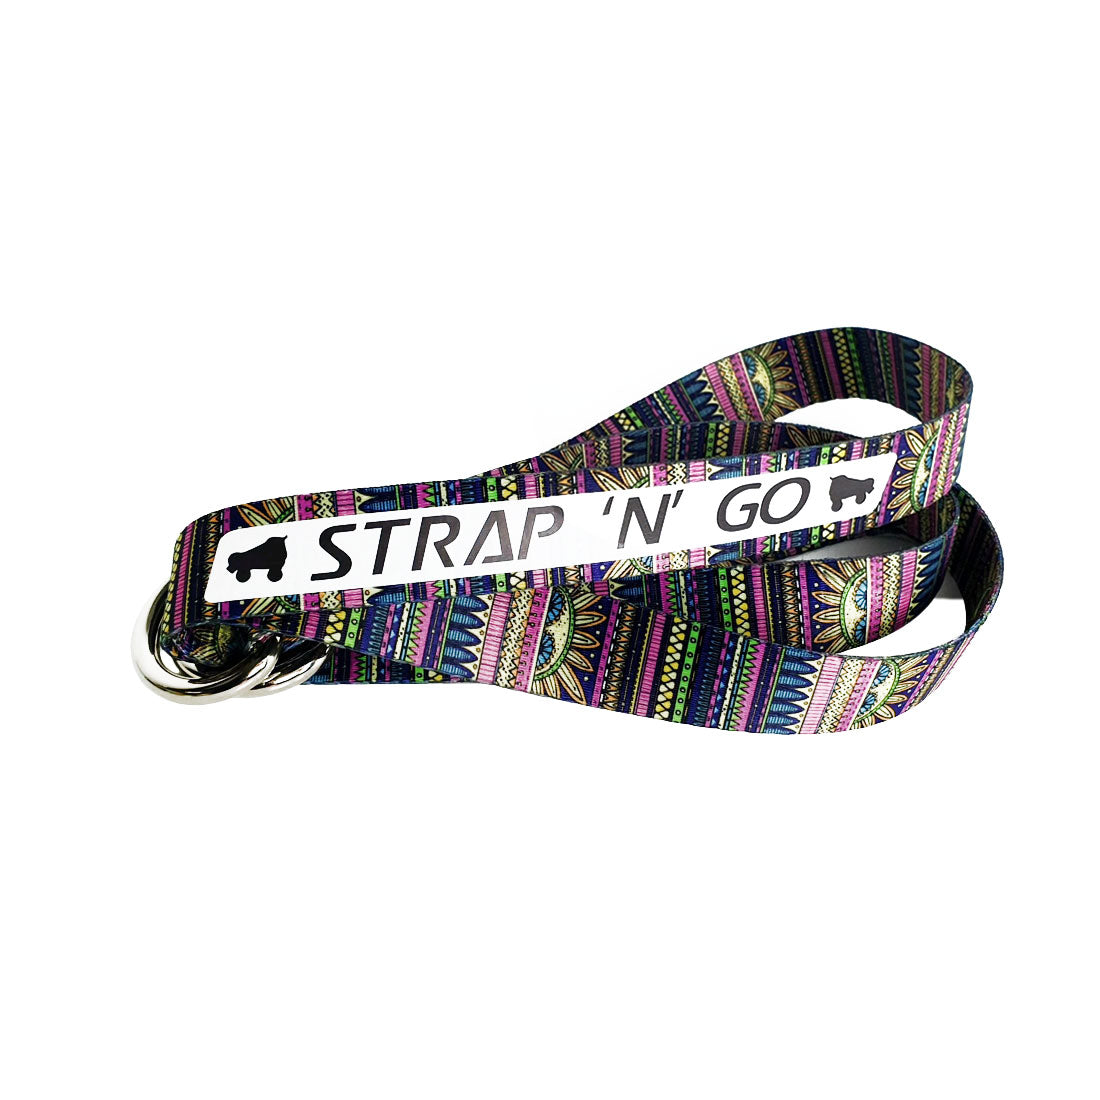 Strap N Go Skate Noose/Leash - Patterns Abstract Roller Skate Accessories